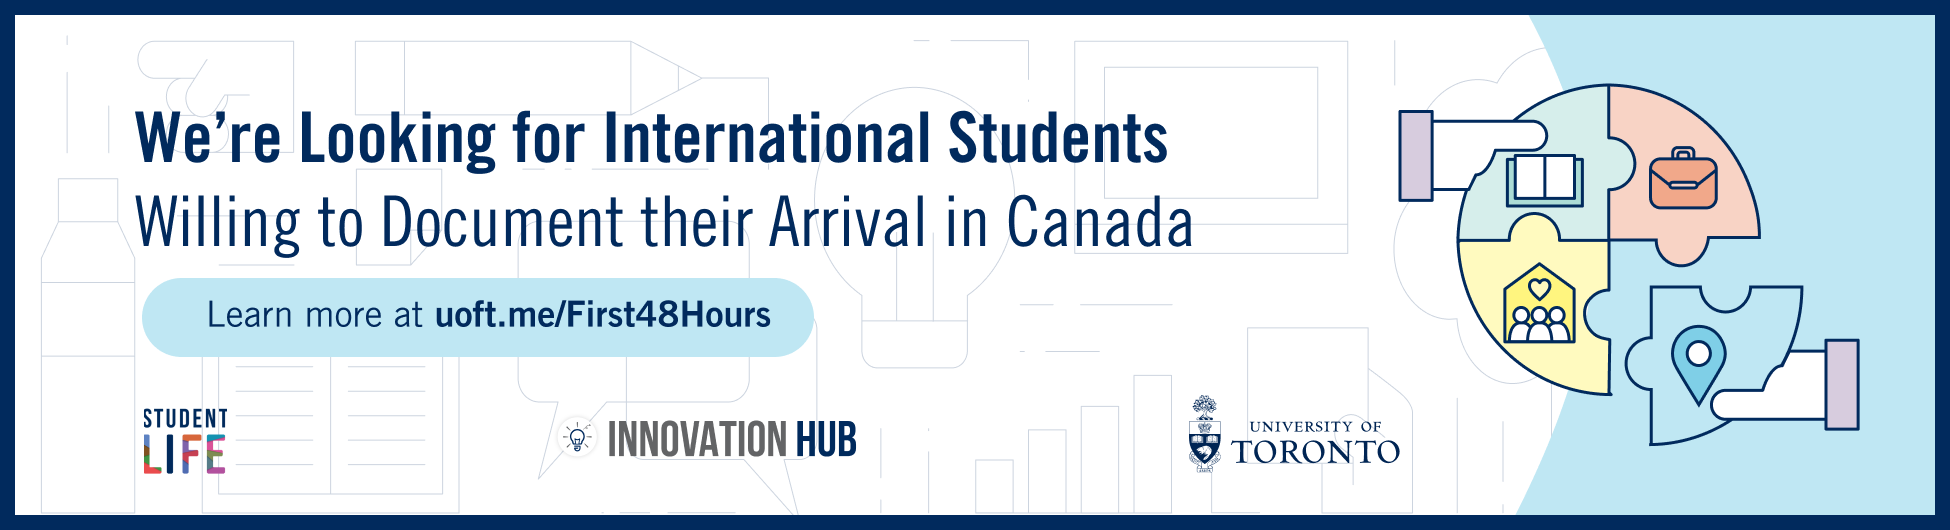 We're Looking for International Students willing to Document their arrival in Canada banner